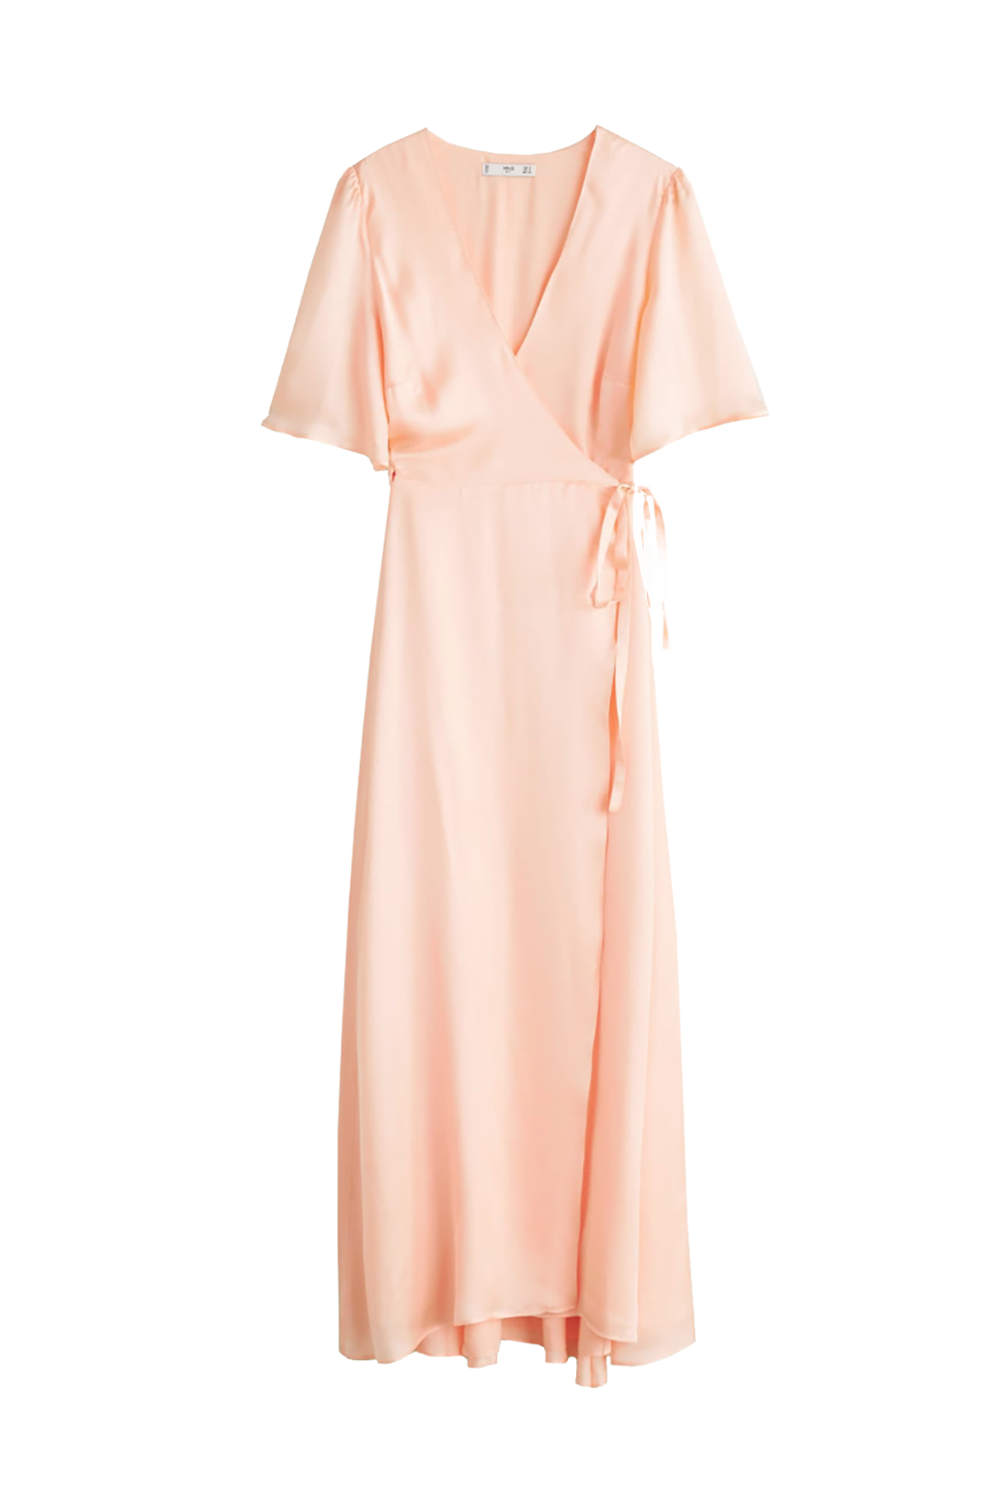 dresses with sleeves for summer wedding